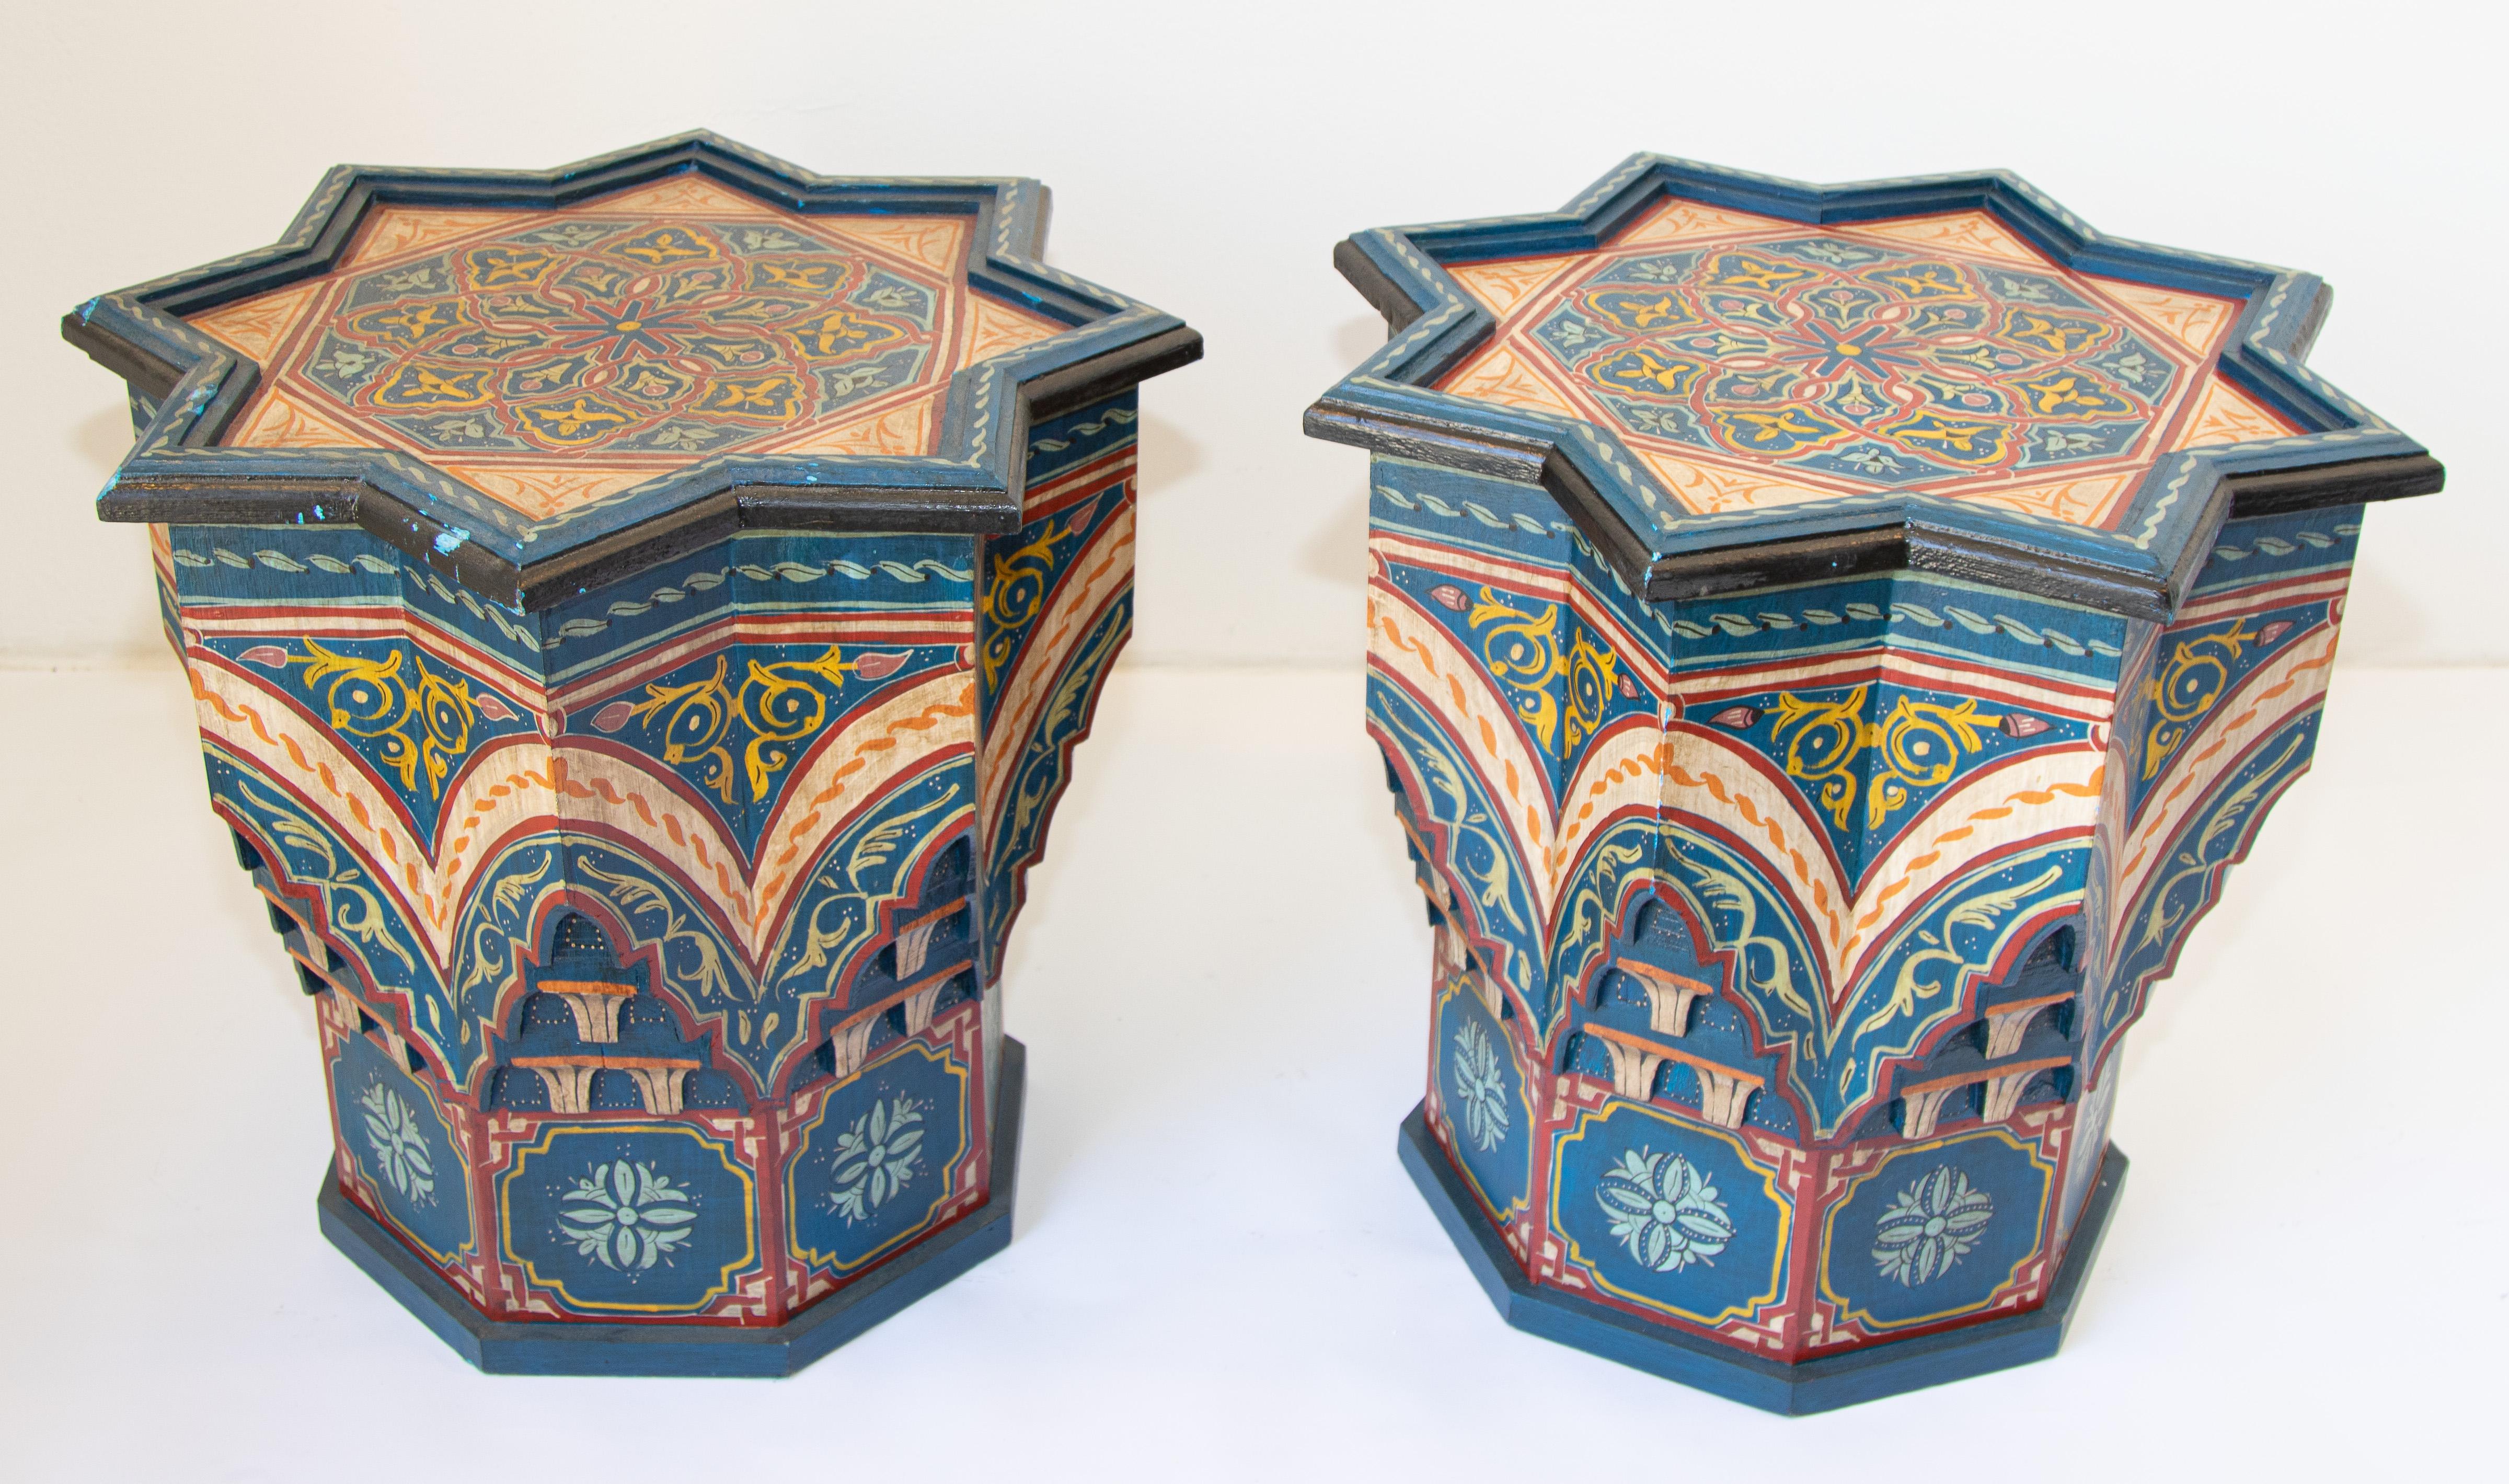 Moroccan colorful blue color hand painted and carved side occasional tables with Moorish designs.
Vintage Moroccan Pedestal tables in cobalt blue background with multicolored floral and geometric designs.
Very decorative Moroccan tables with fine